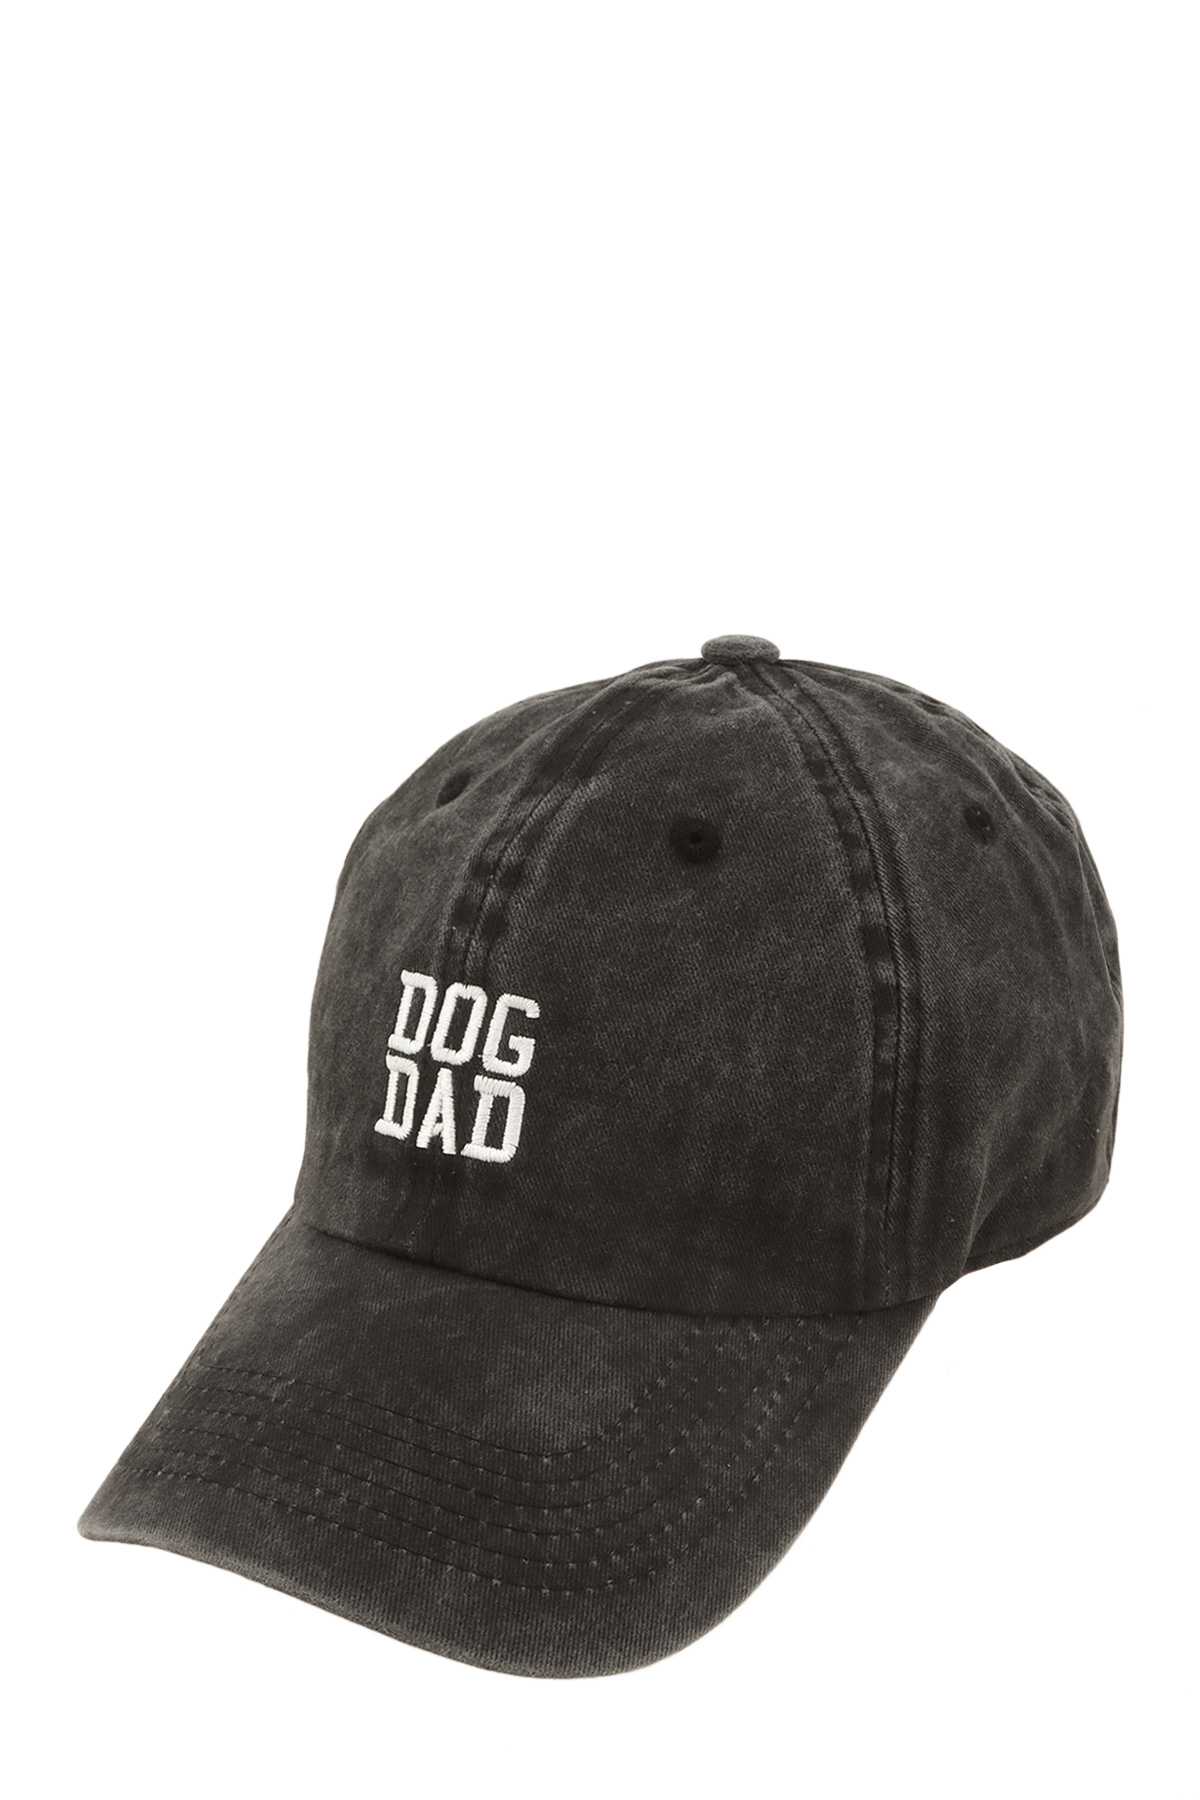 DOG DAD EMBROIDERY PIGMENT WASHED CAP